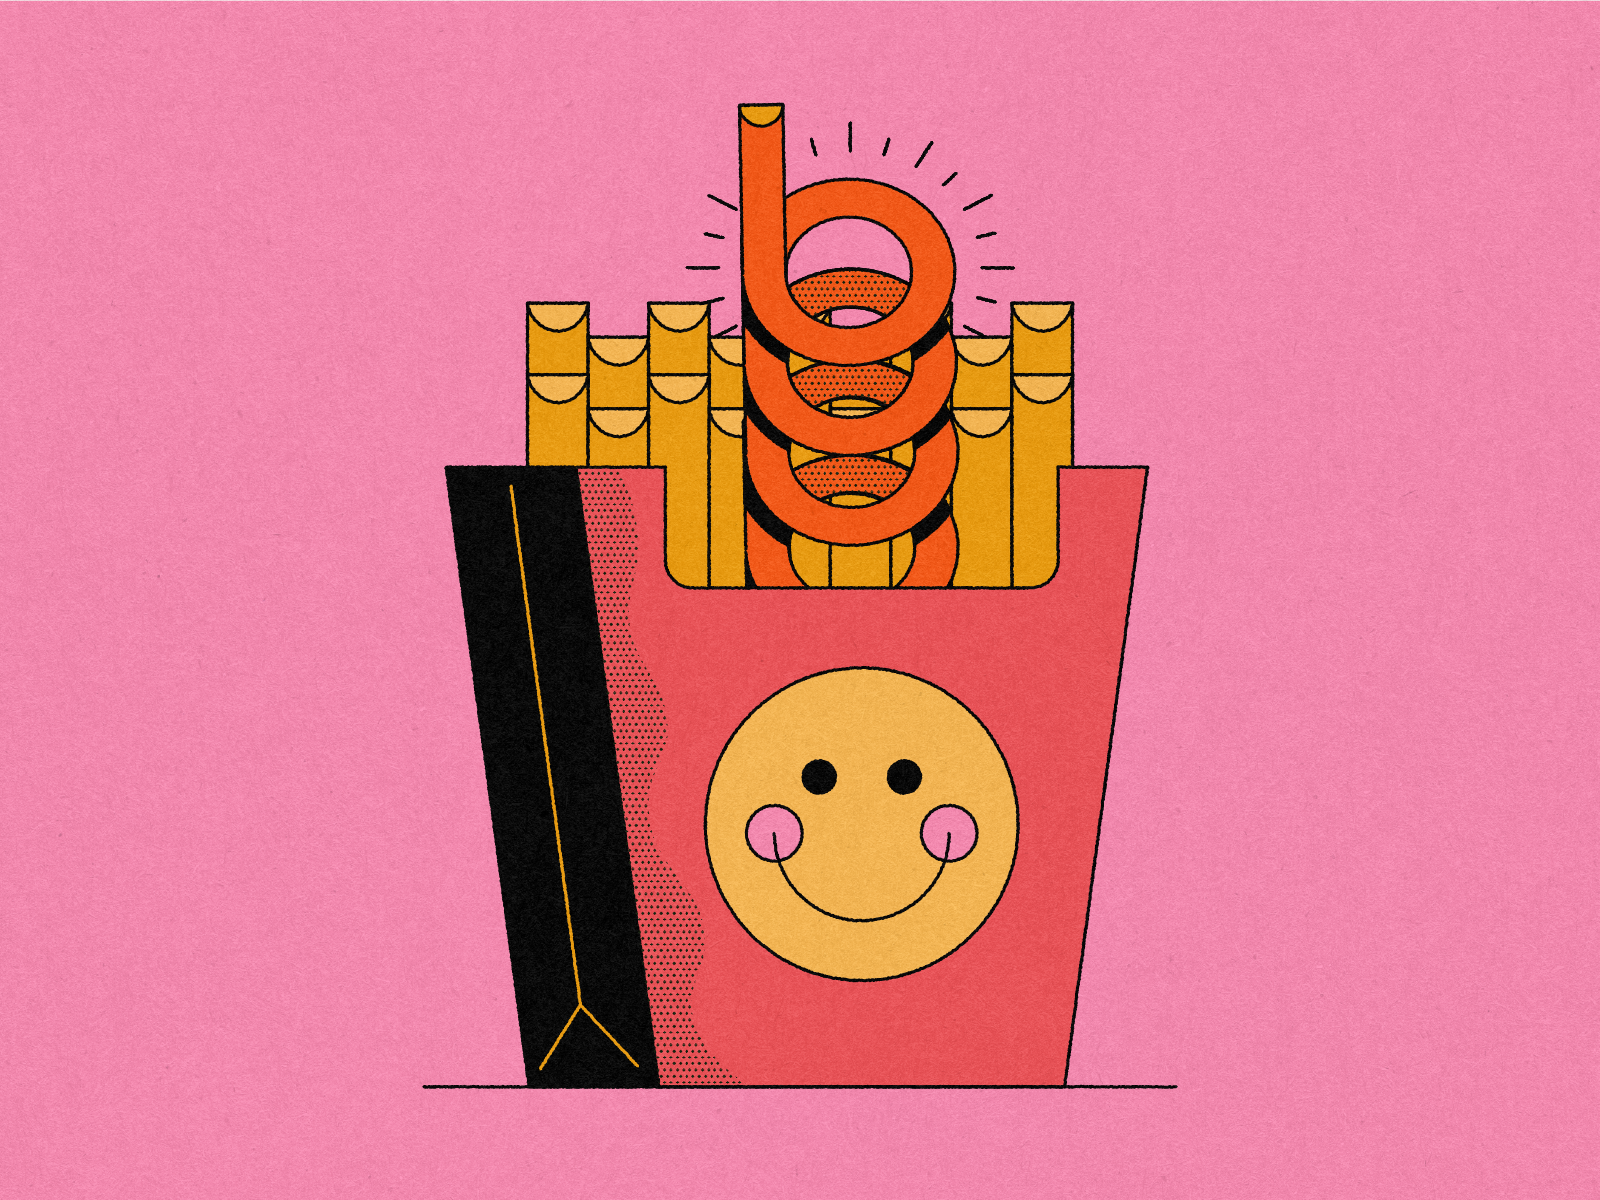 Vectober 25: Unexpected snacks fast food food curly fry french fry illustration